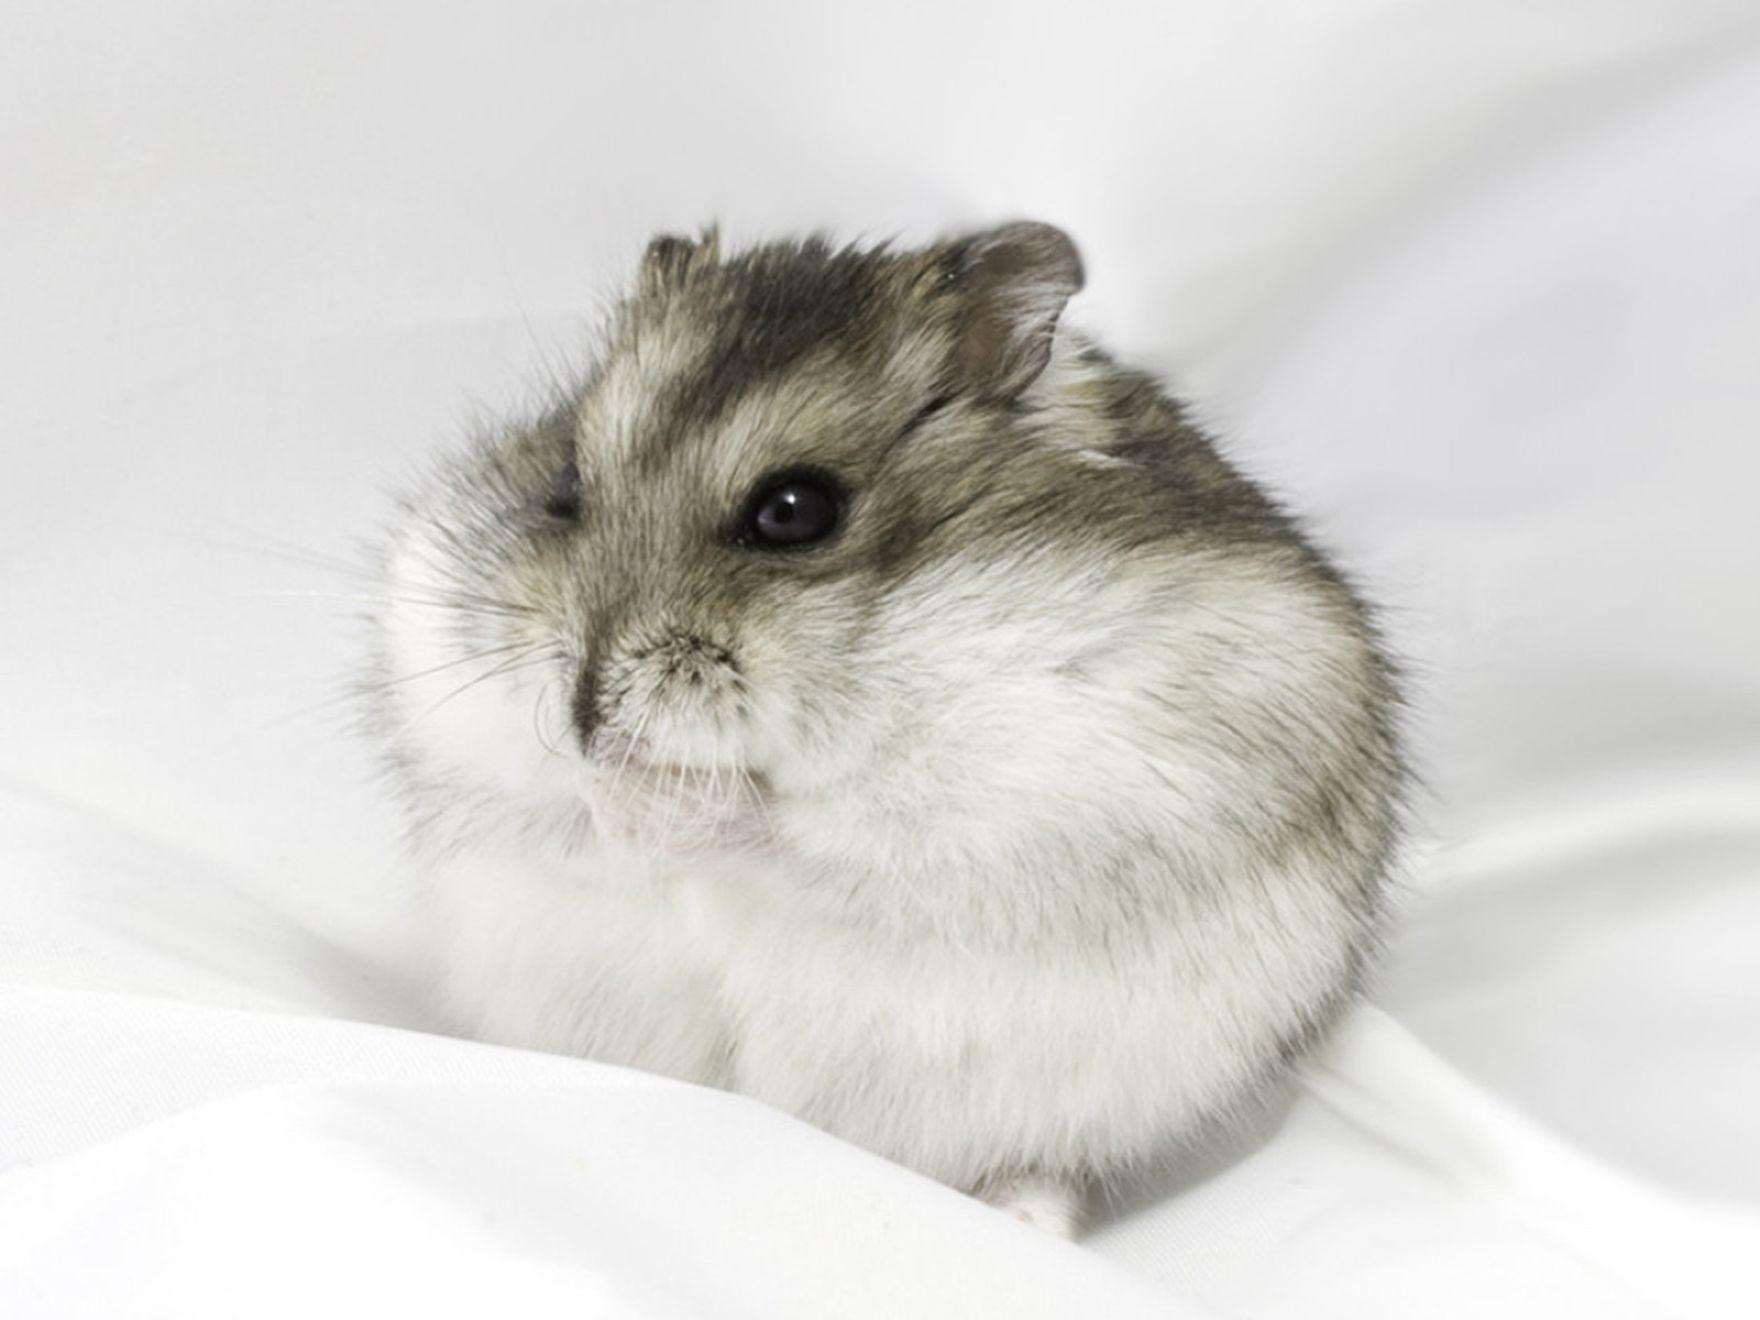 Cute Hamster Wallpaper for Free Download on MoboMarket 1600×1000